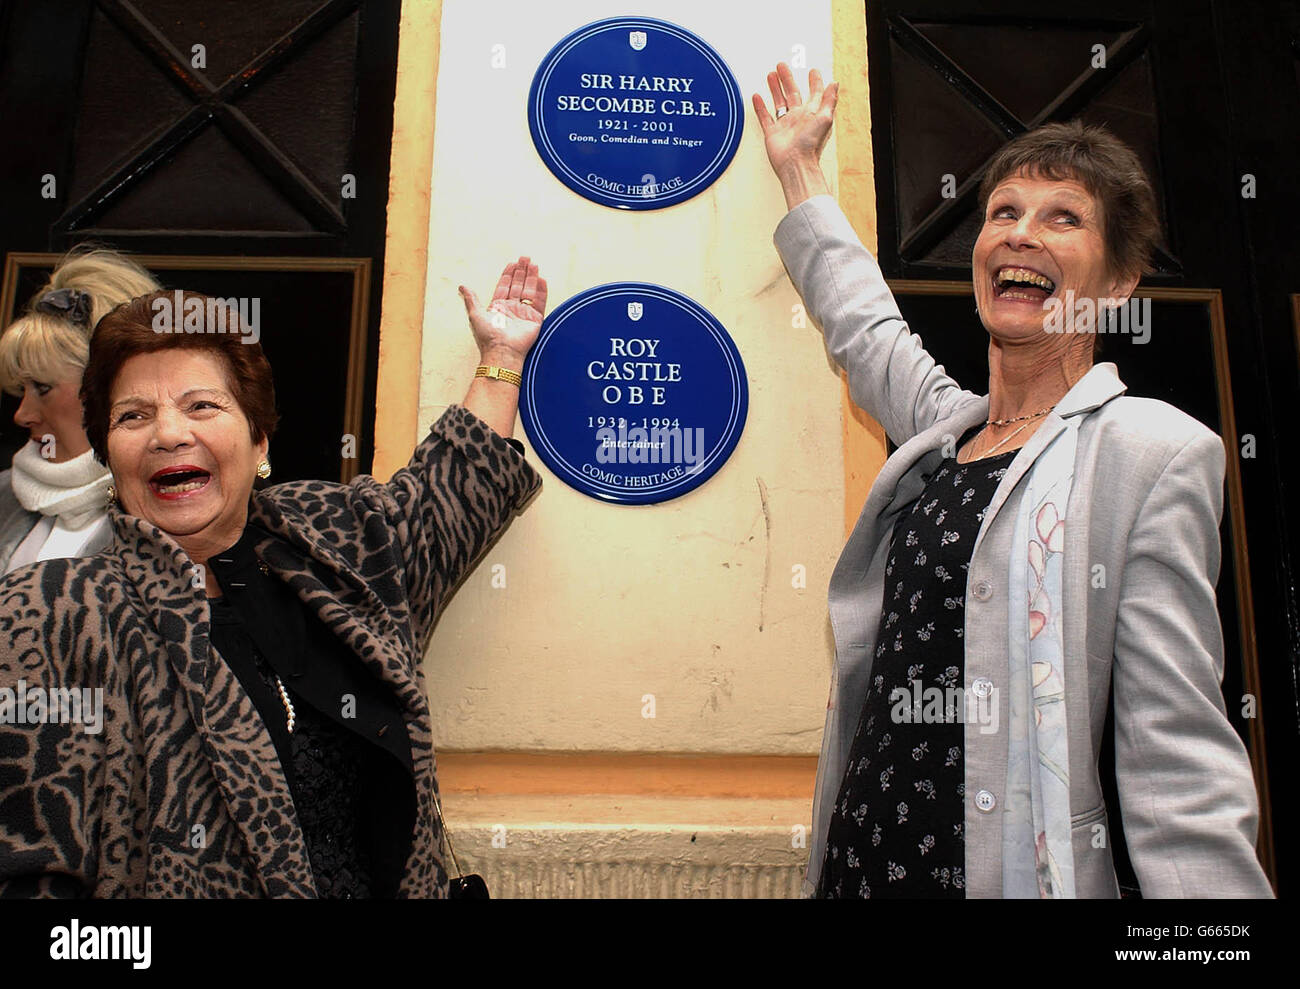 Fiona Castle (right) and Lady Myra Secombe, the widows of entertainers of Roy Castle and Sir Harry Secombe unveil Comic Heritage Blue Plaques to their husbands at the Opera House in Manchester. Stock Photo